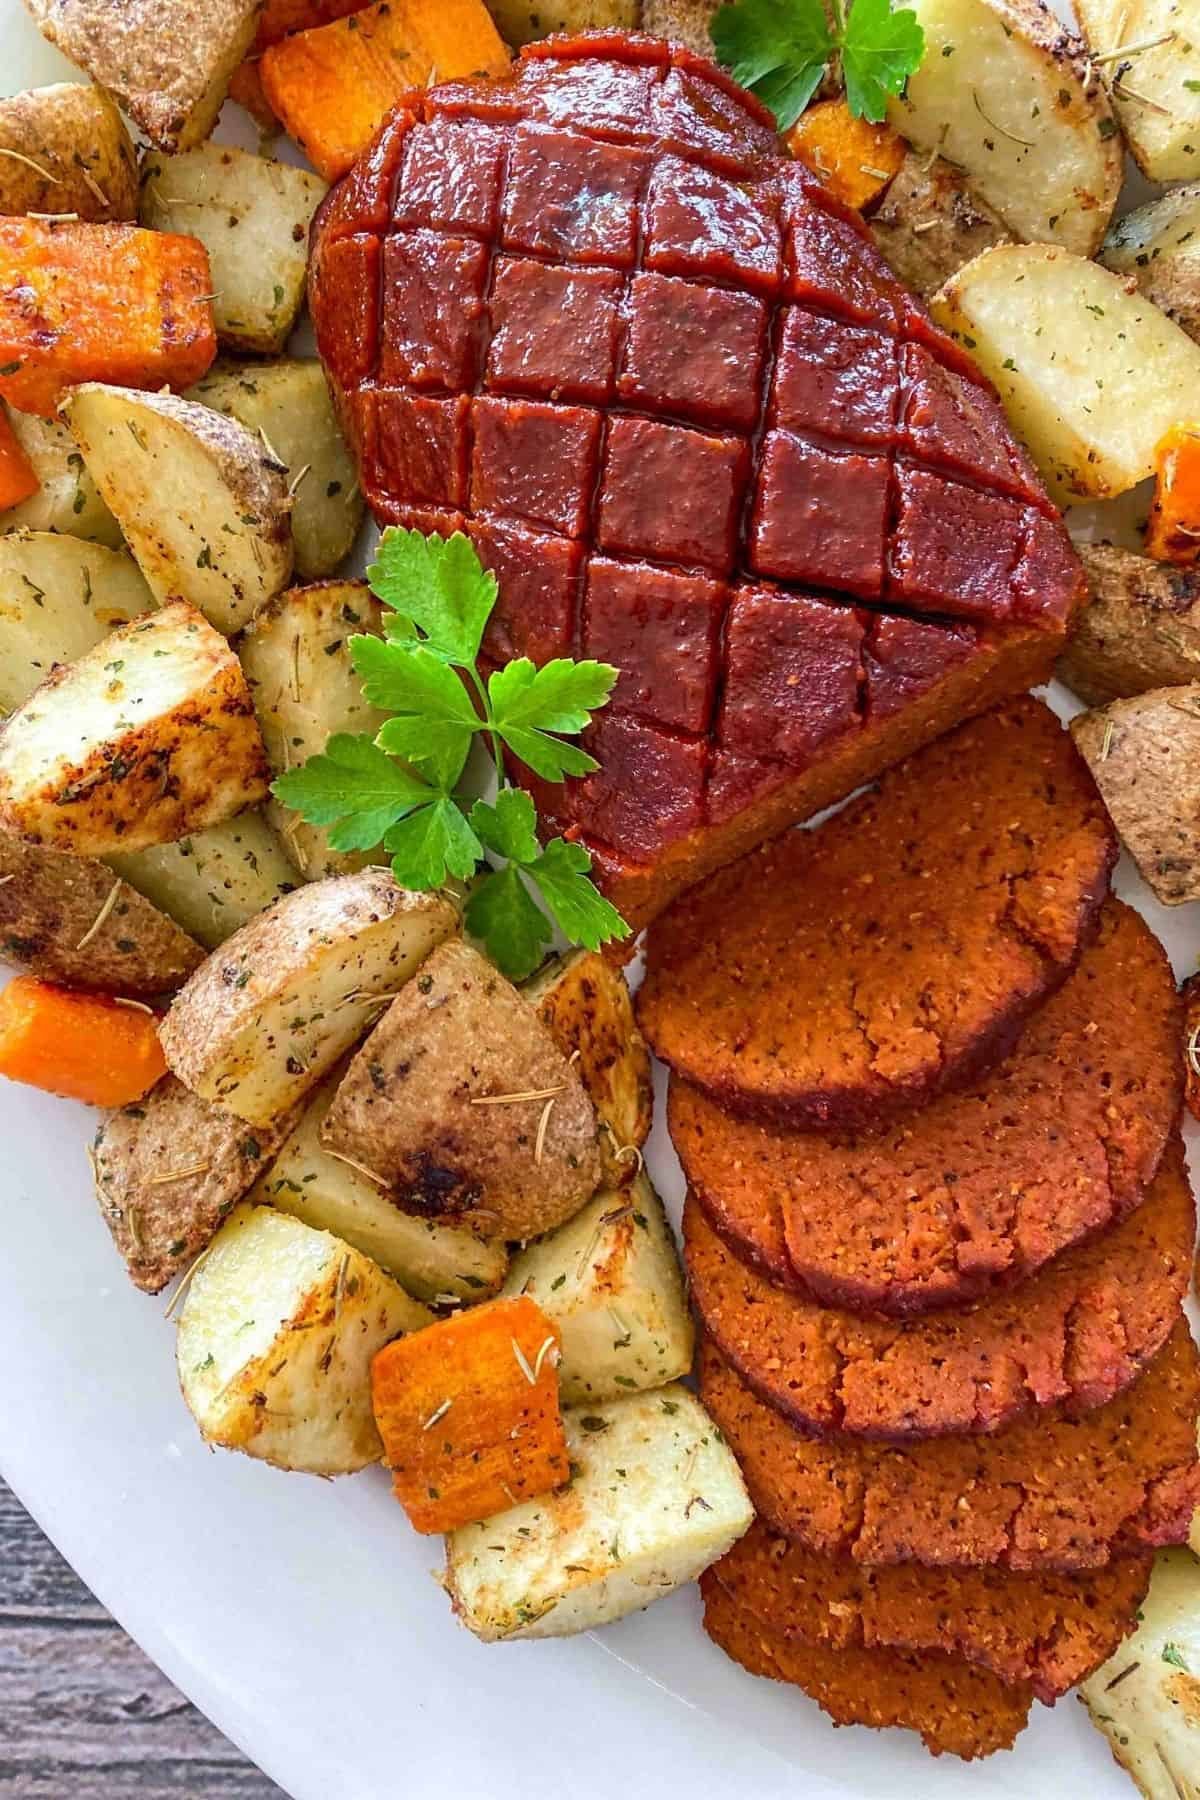 A vegan ham sliced on platter with roasted potatoes and carrots surrounding it.